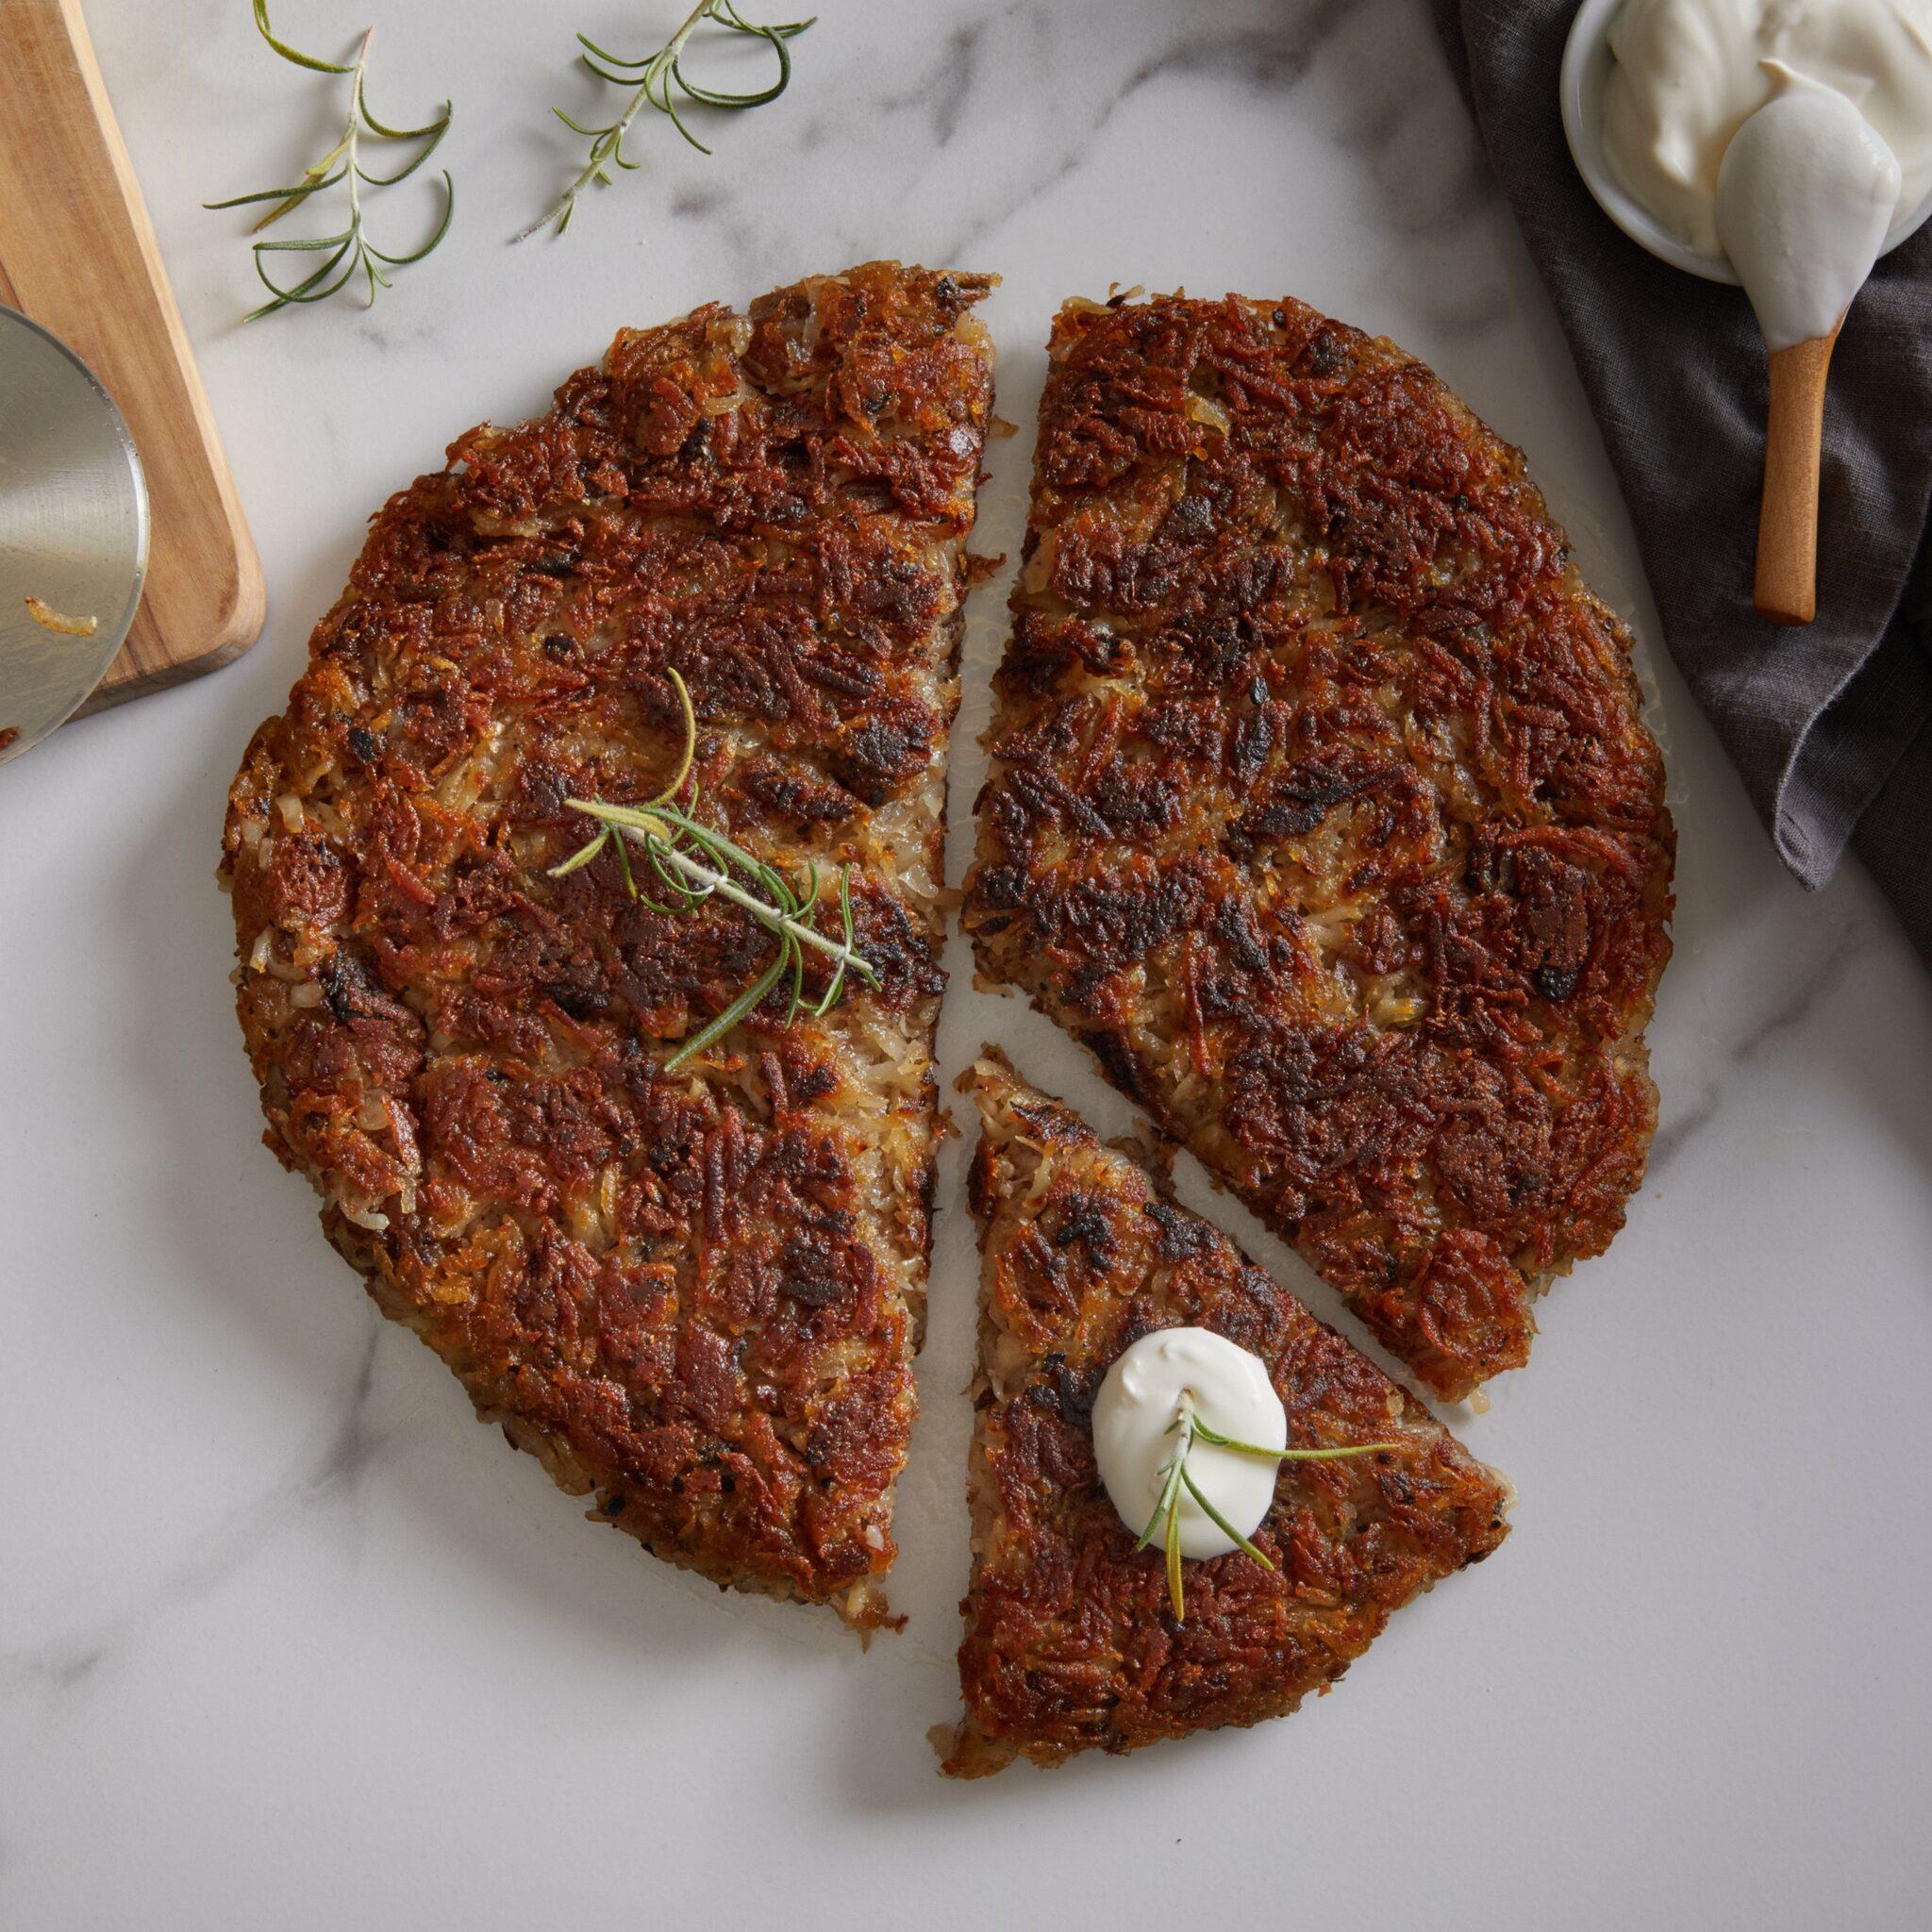 This horseradish potato rosti is great for any meal.